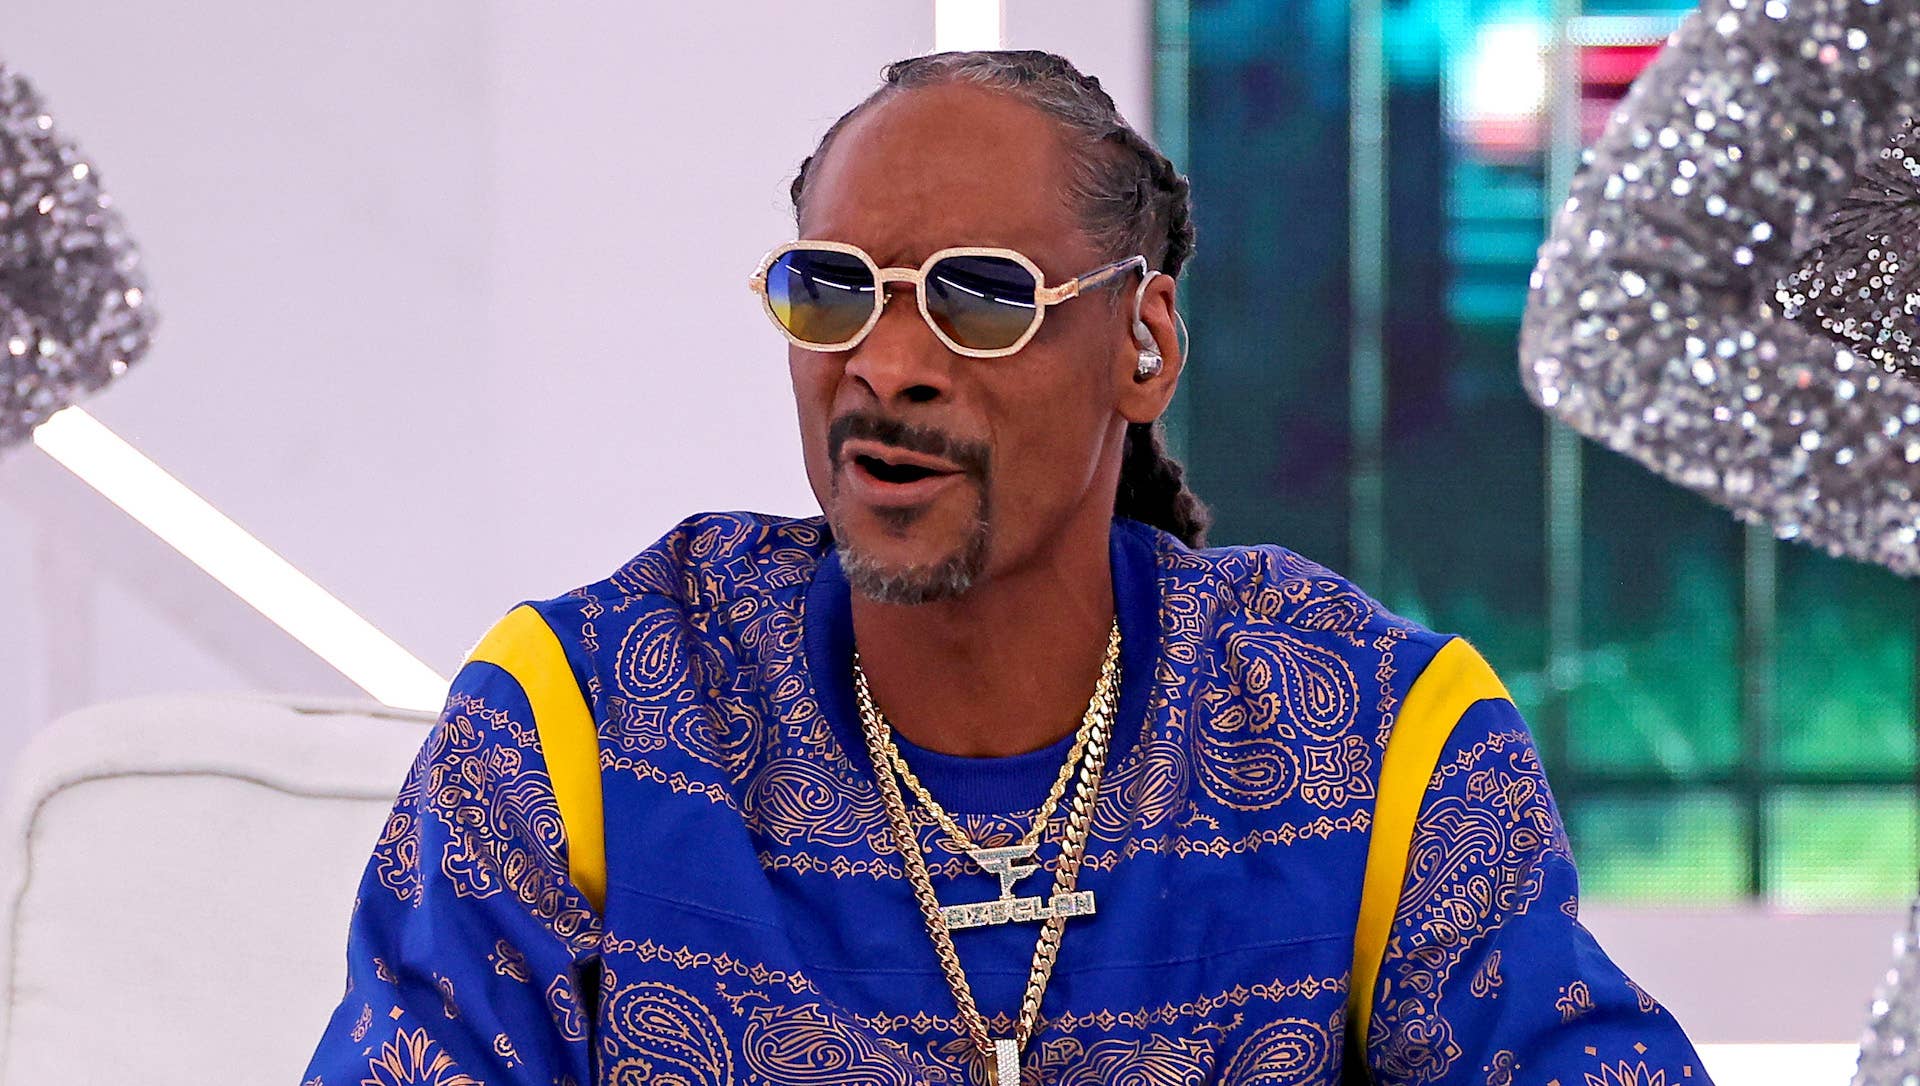 Snoop Dogg pictured at halftime show